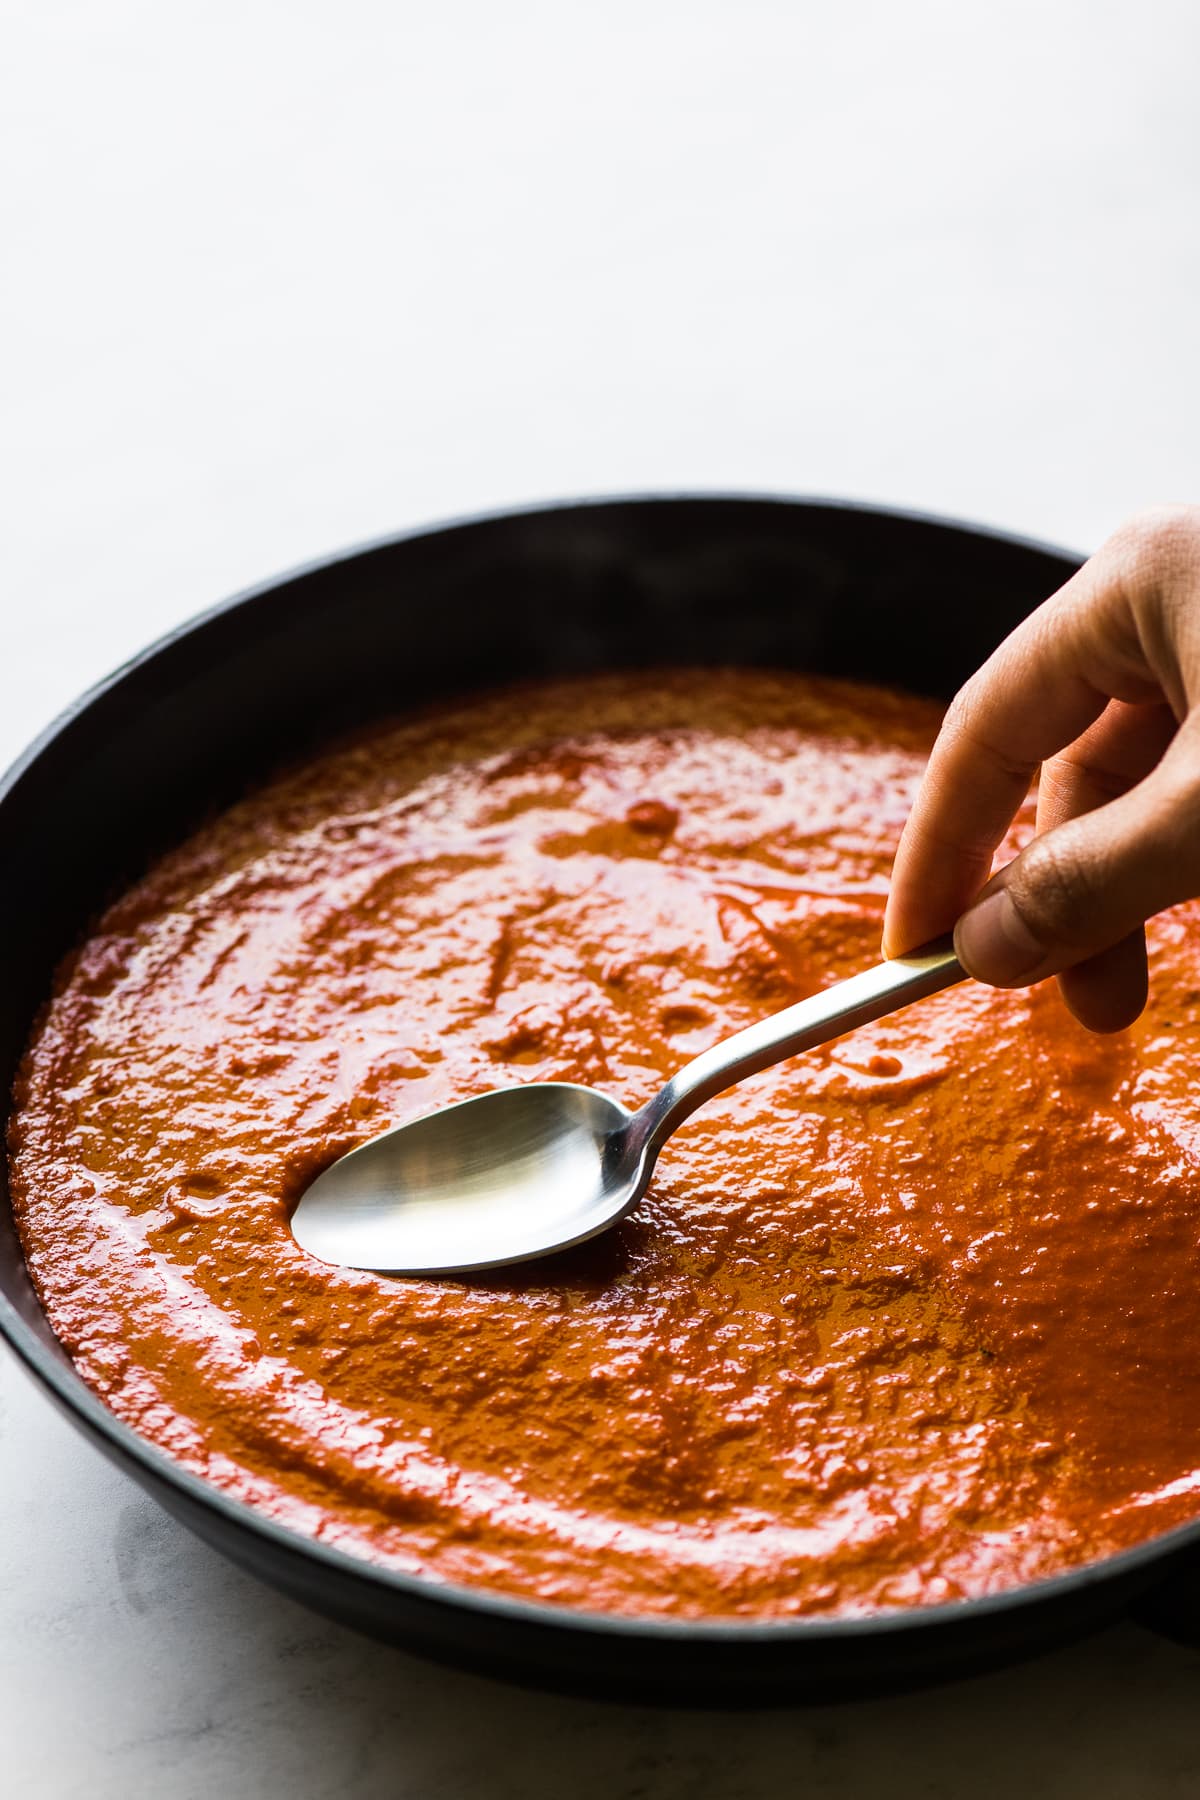 Making a well with the back of a spoon in salsa.